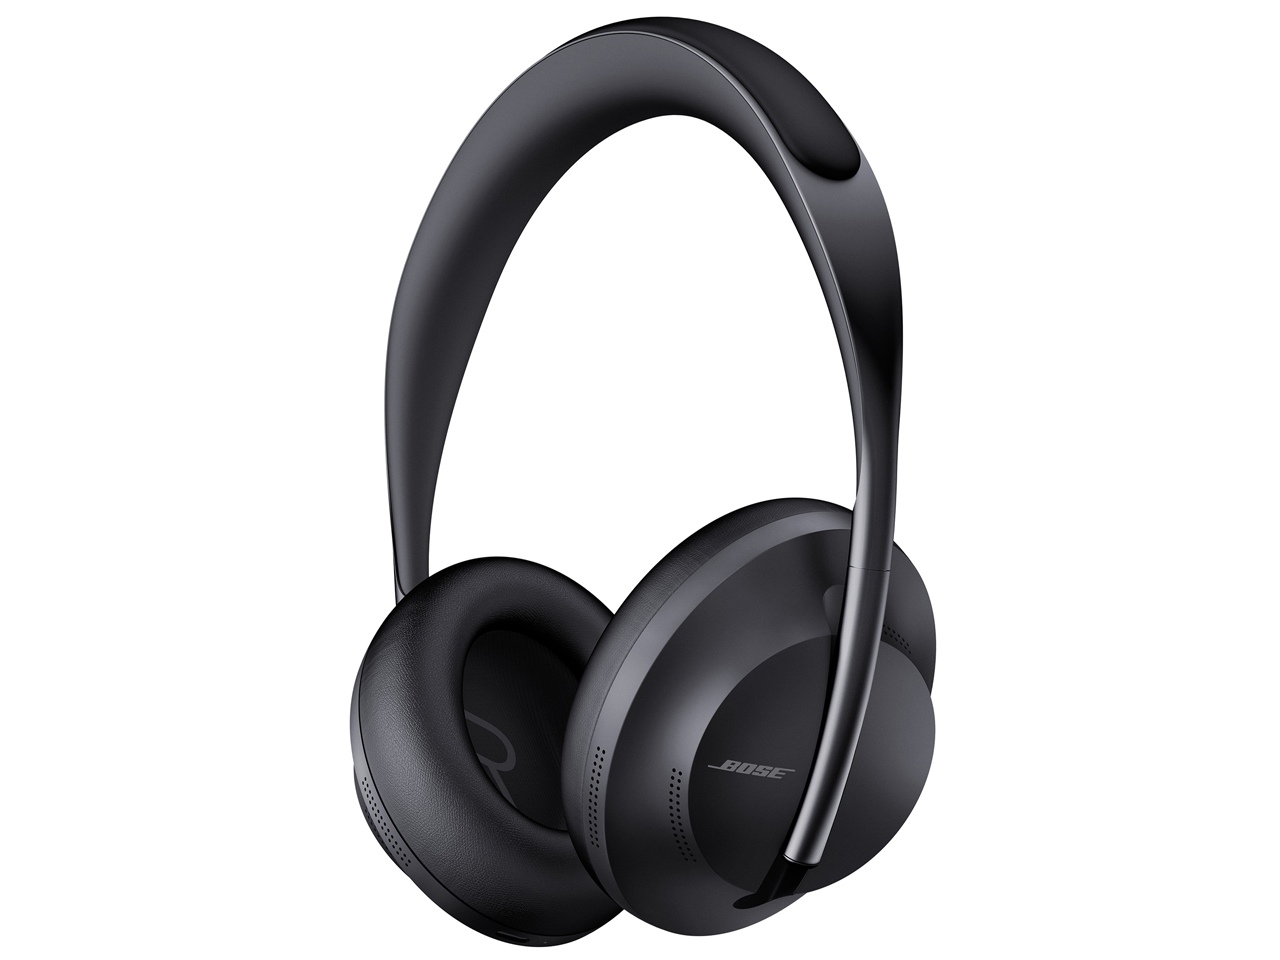 NOISE CANCELLING HEADPHONES 700 [gvubN]